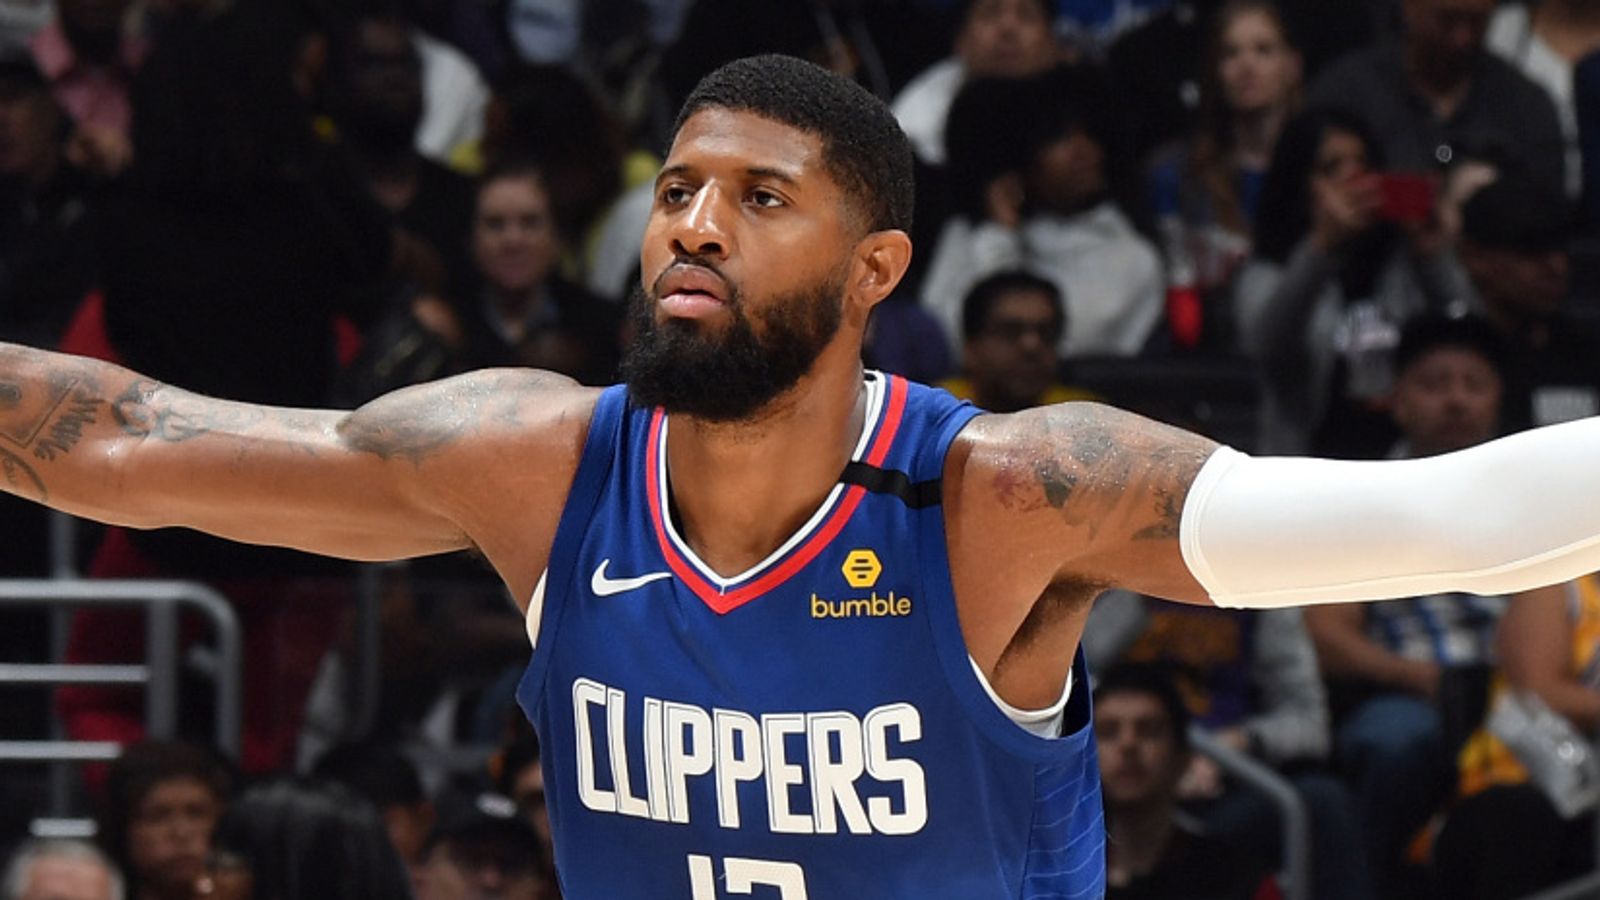 Paul George is LA Clippers' key ingredient to championship hopes, says Mike Tuck | NBA News ...